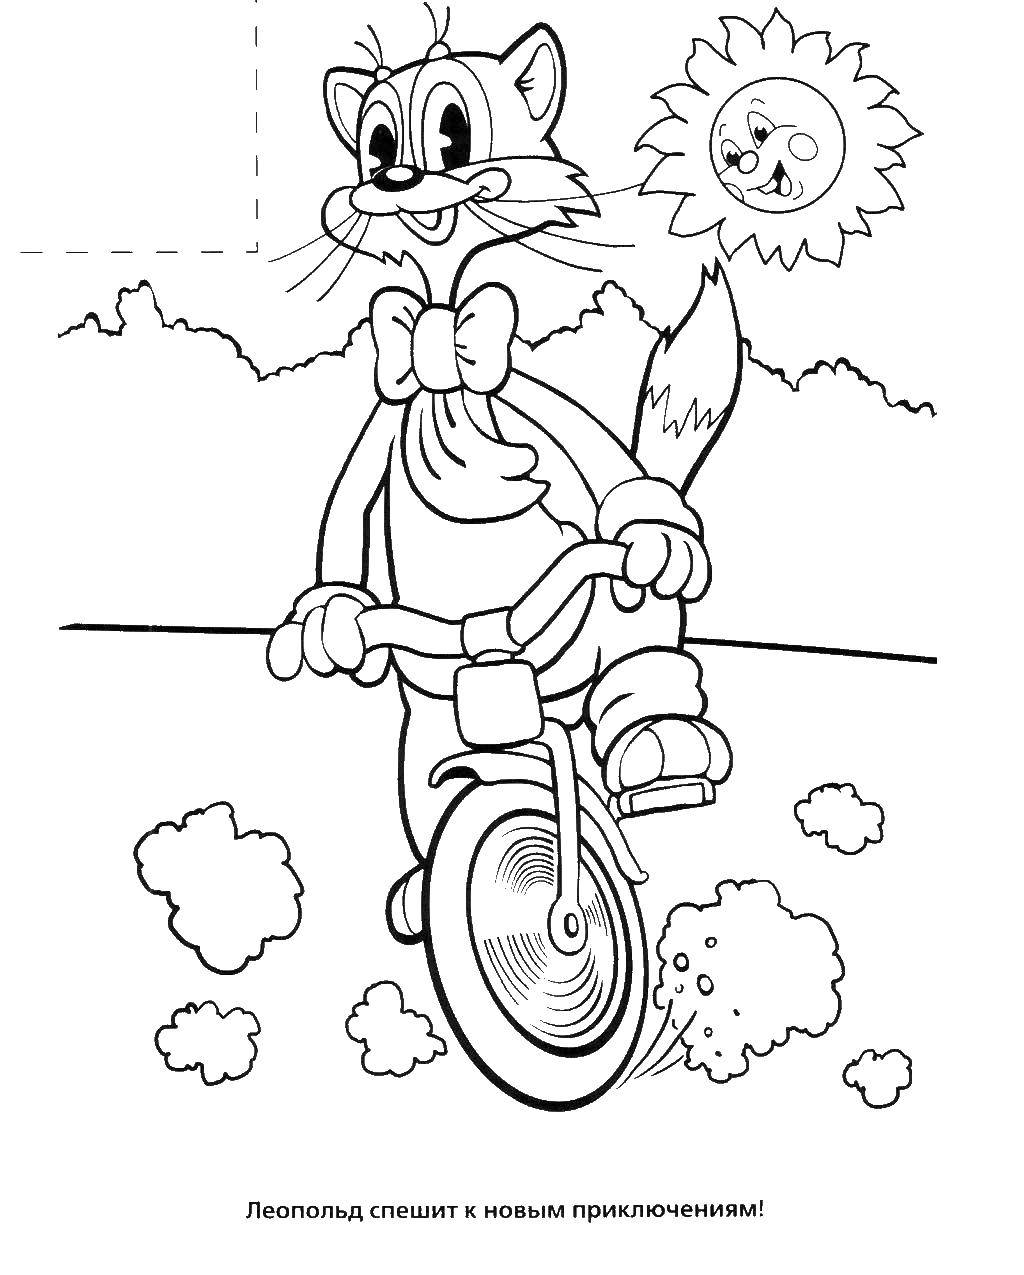 Coloring Leopold the cat riding a Bicycle. Category coloring cat Leopold. Tags:  The cat, Leopold.